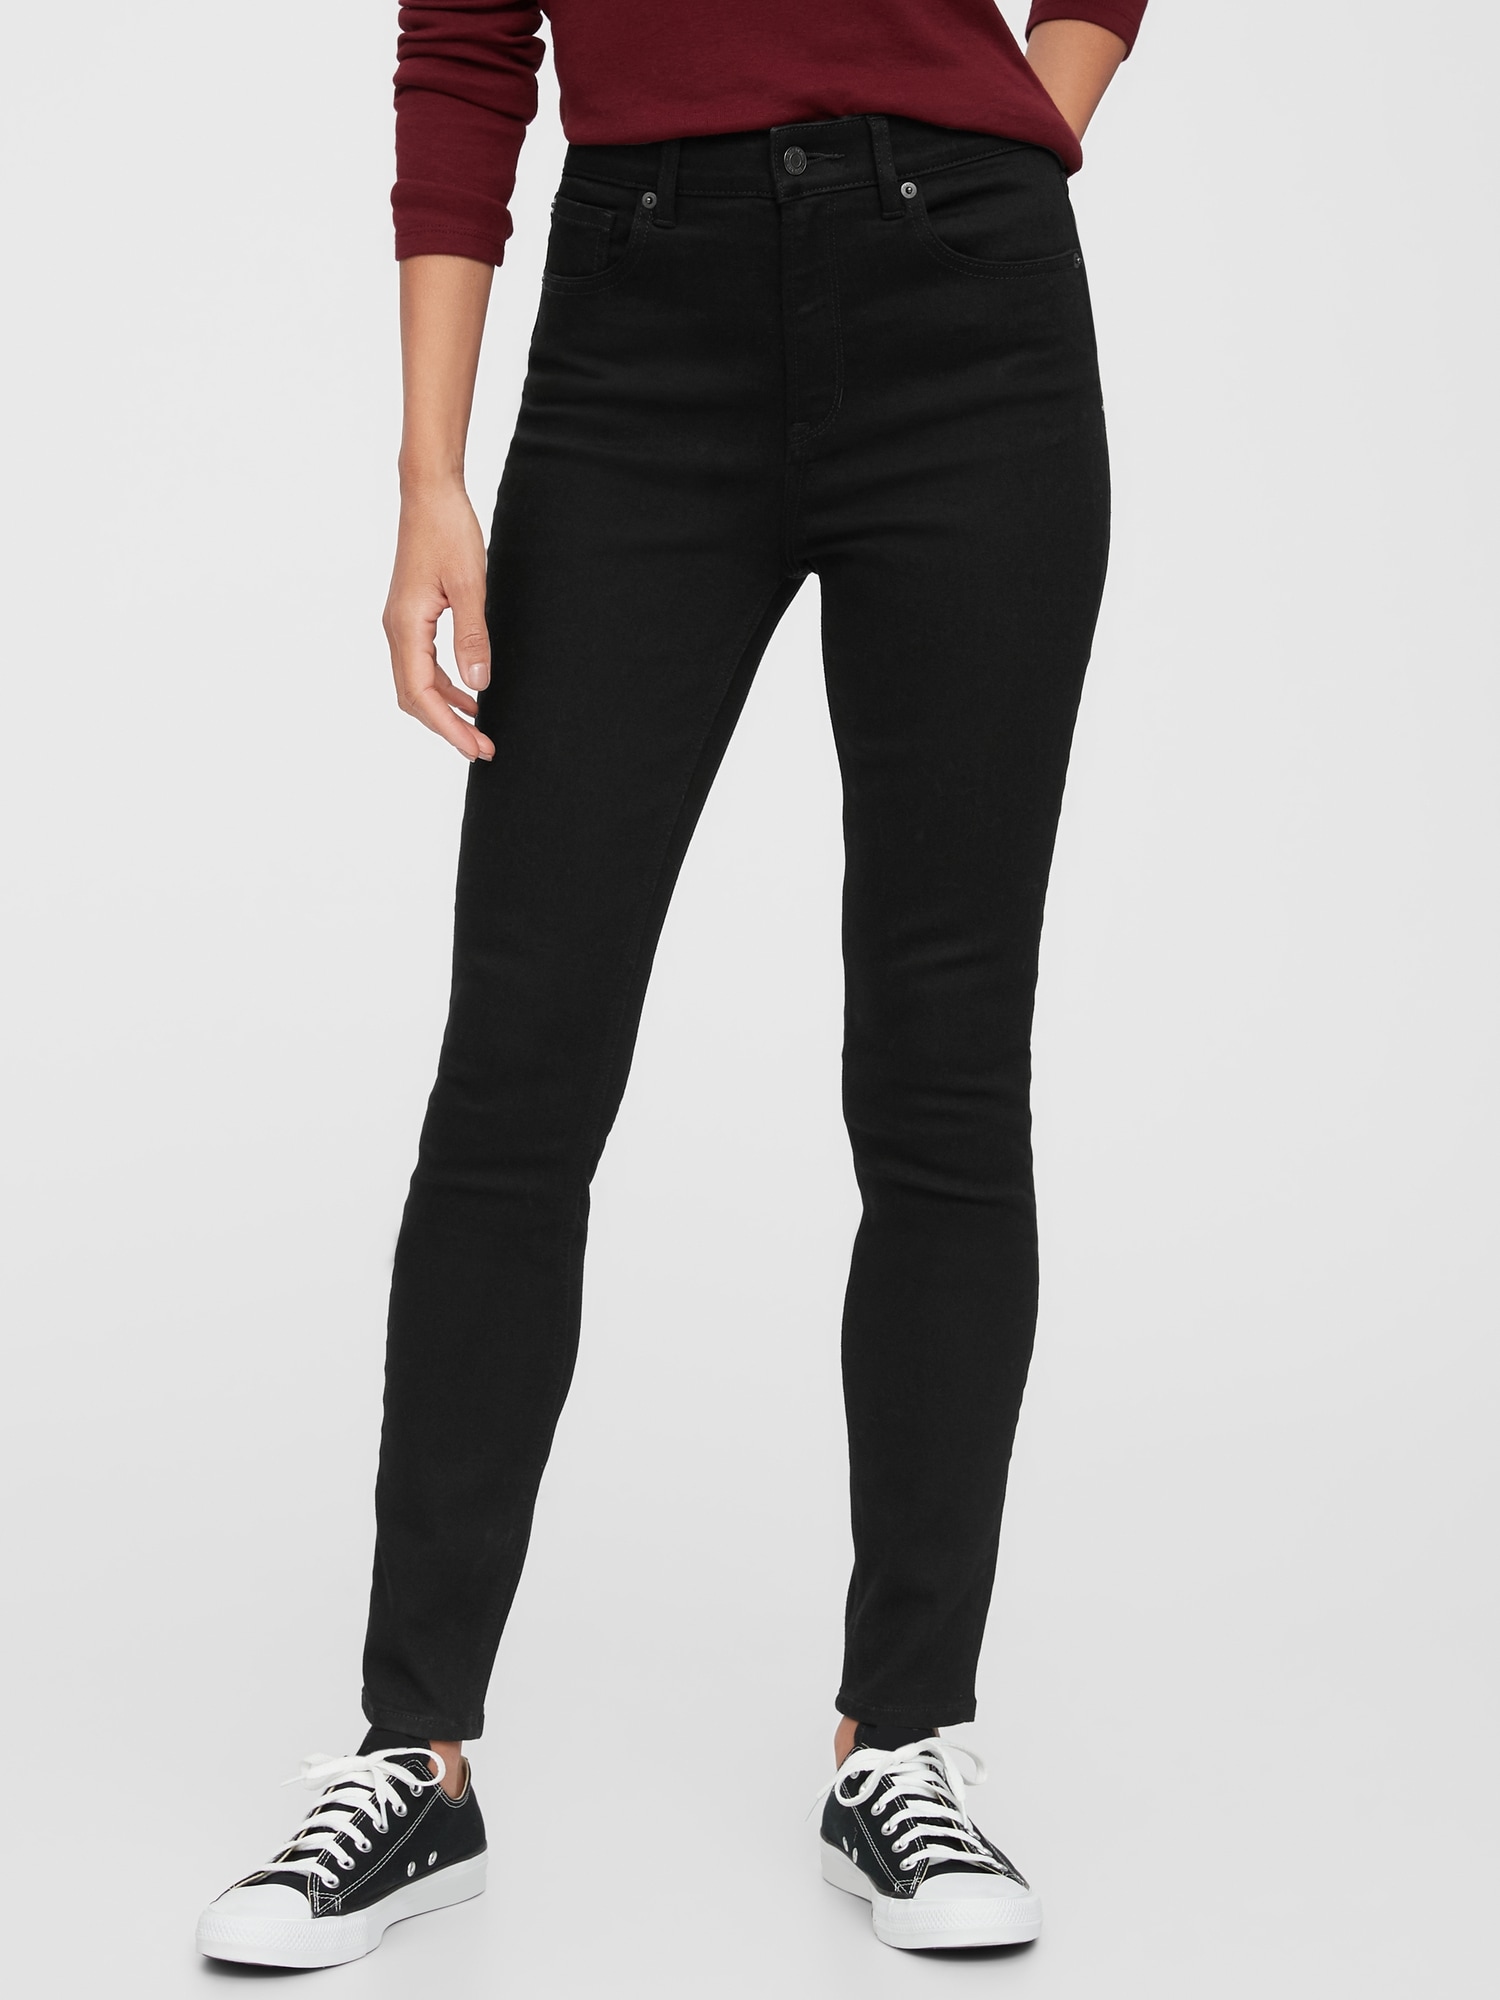 High Rise Universal Legging Jeans With Washwell | Gap Factory